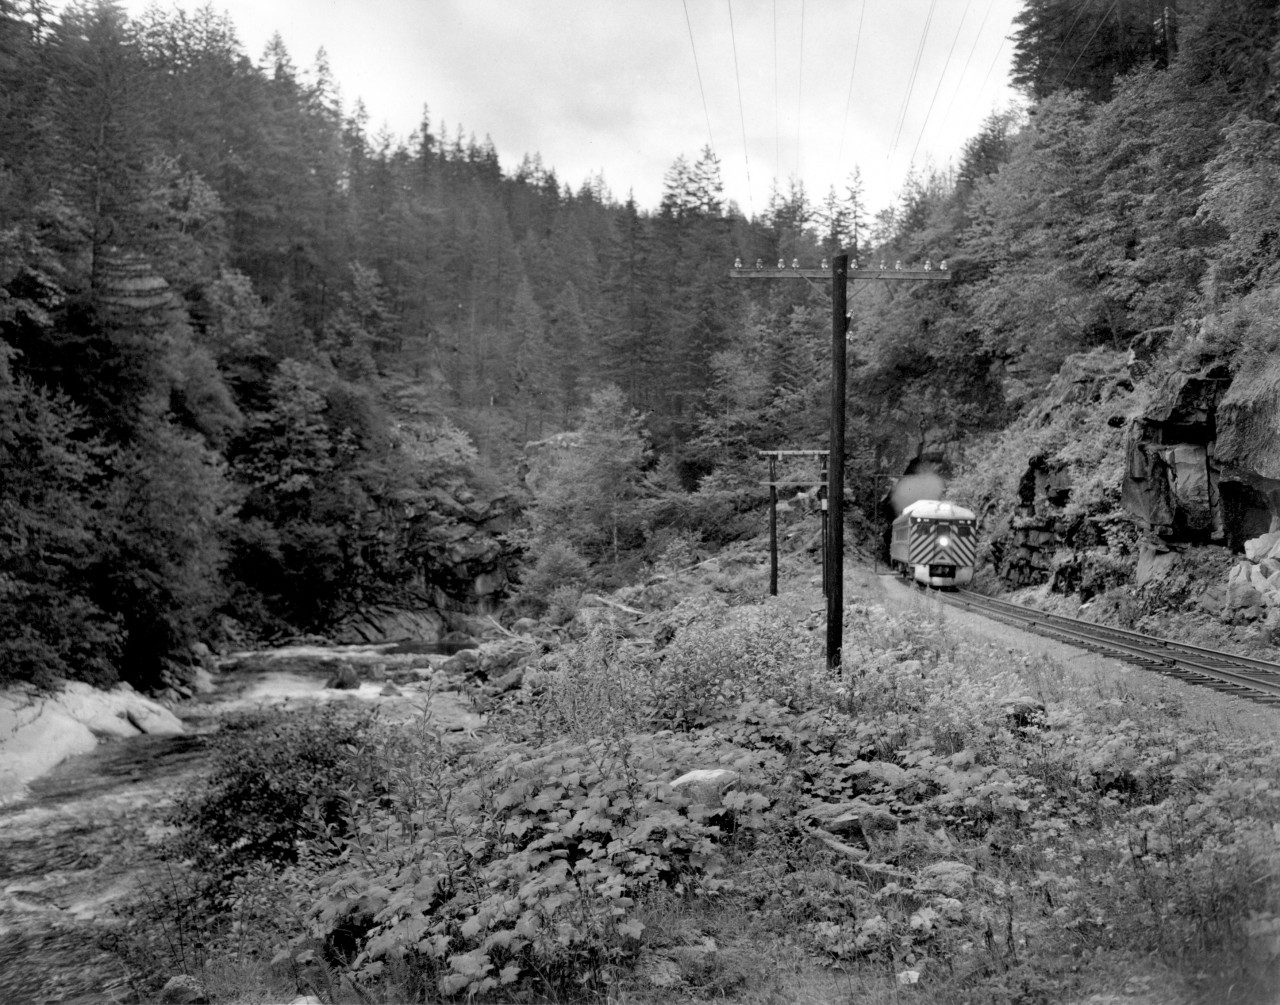 Shortly after previous photo of #46, Extra excursion train near Othello.  Train has just exited quintette tunnels (note telltale around RDC).  In about two months, the Coquihalla line would be closed by washouts.